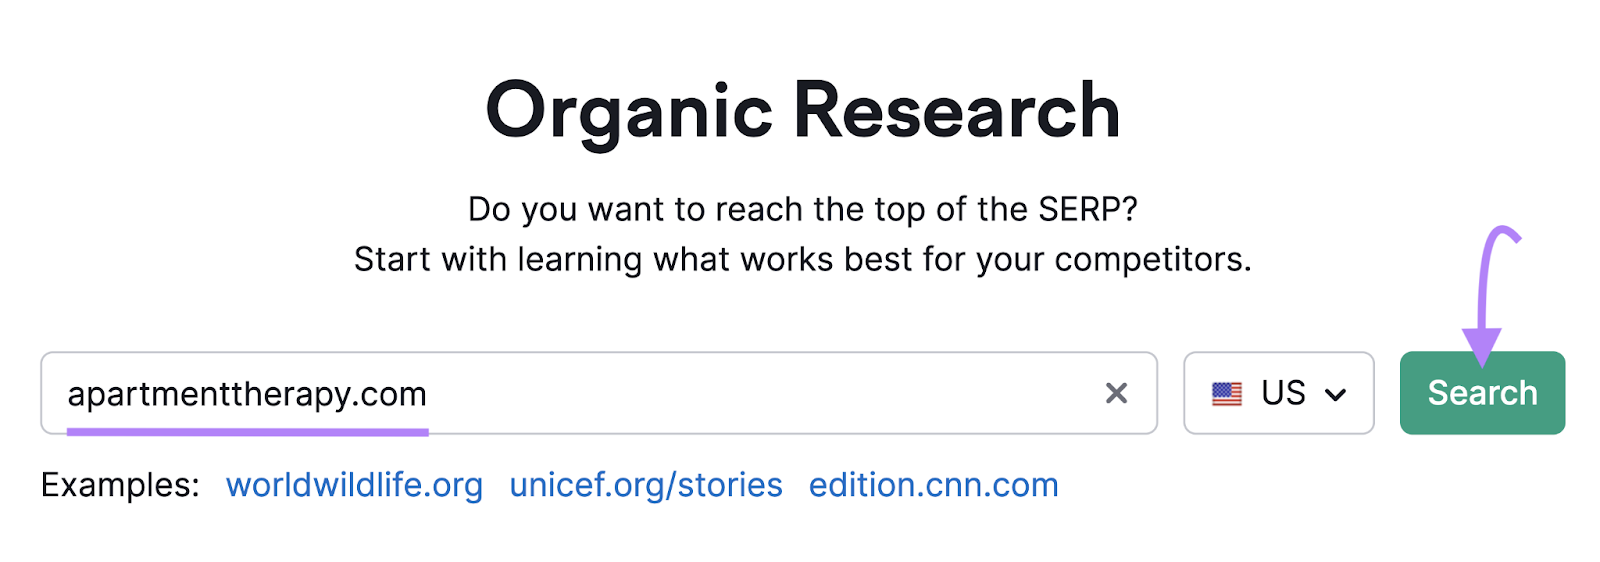 "apartmenttherapy.com" entered into Organic Research tool search bar